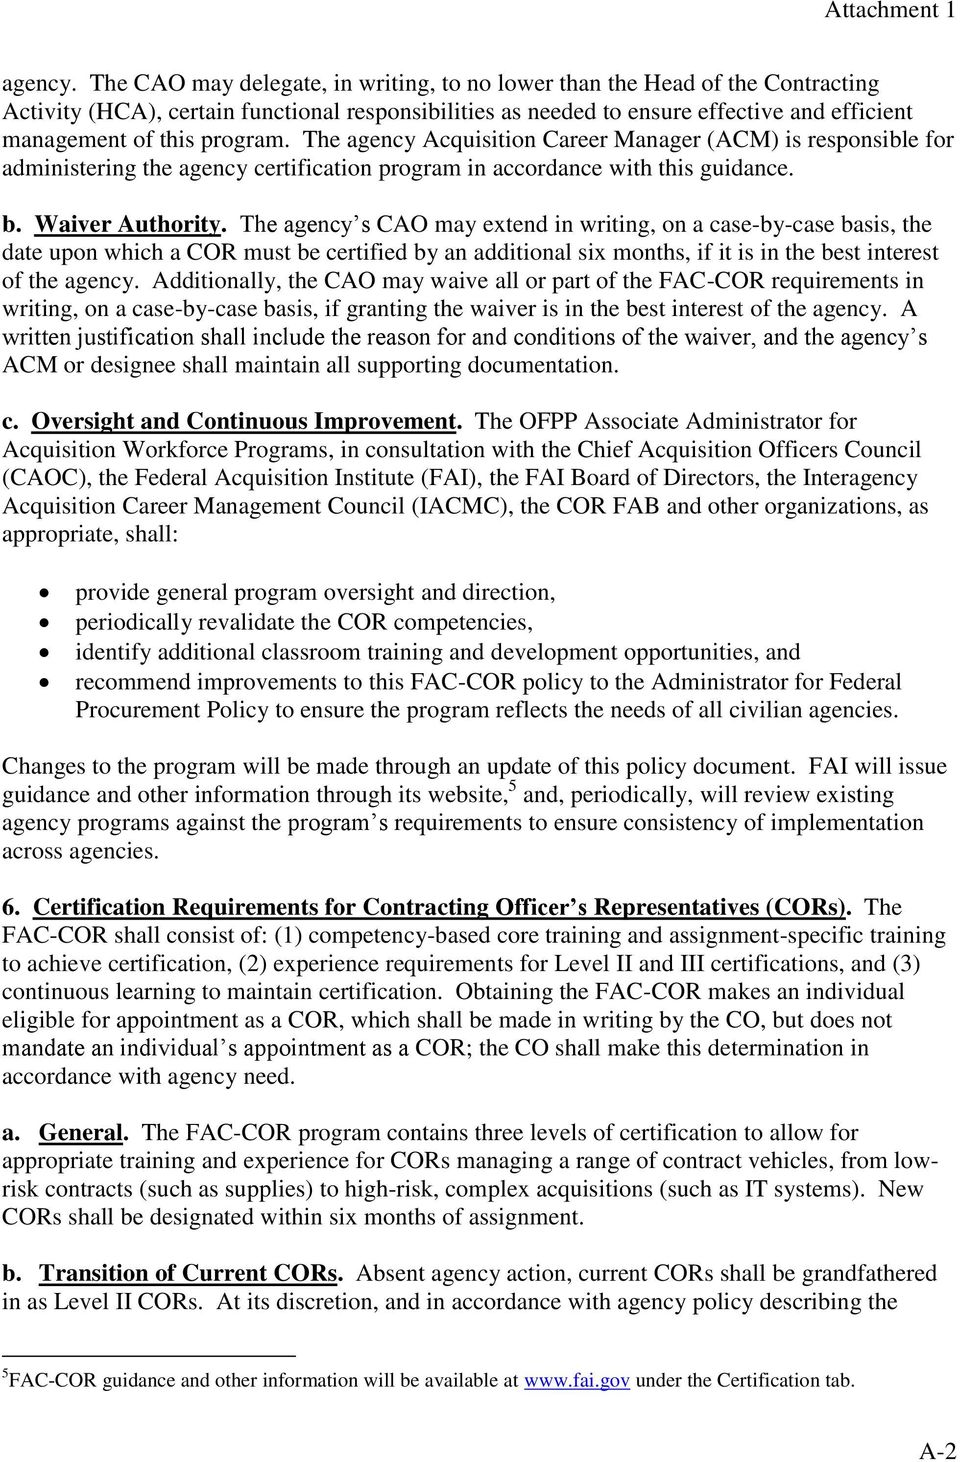 program. The agency Acquisition Career Manager (ACM) is responsible for administering the agency certification program in accordance with this guidance. b. Waiver Authority.